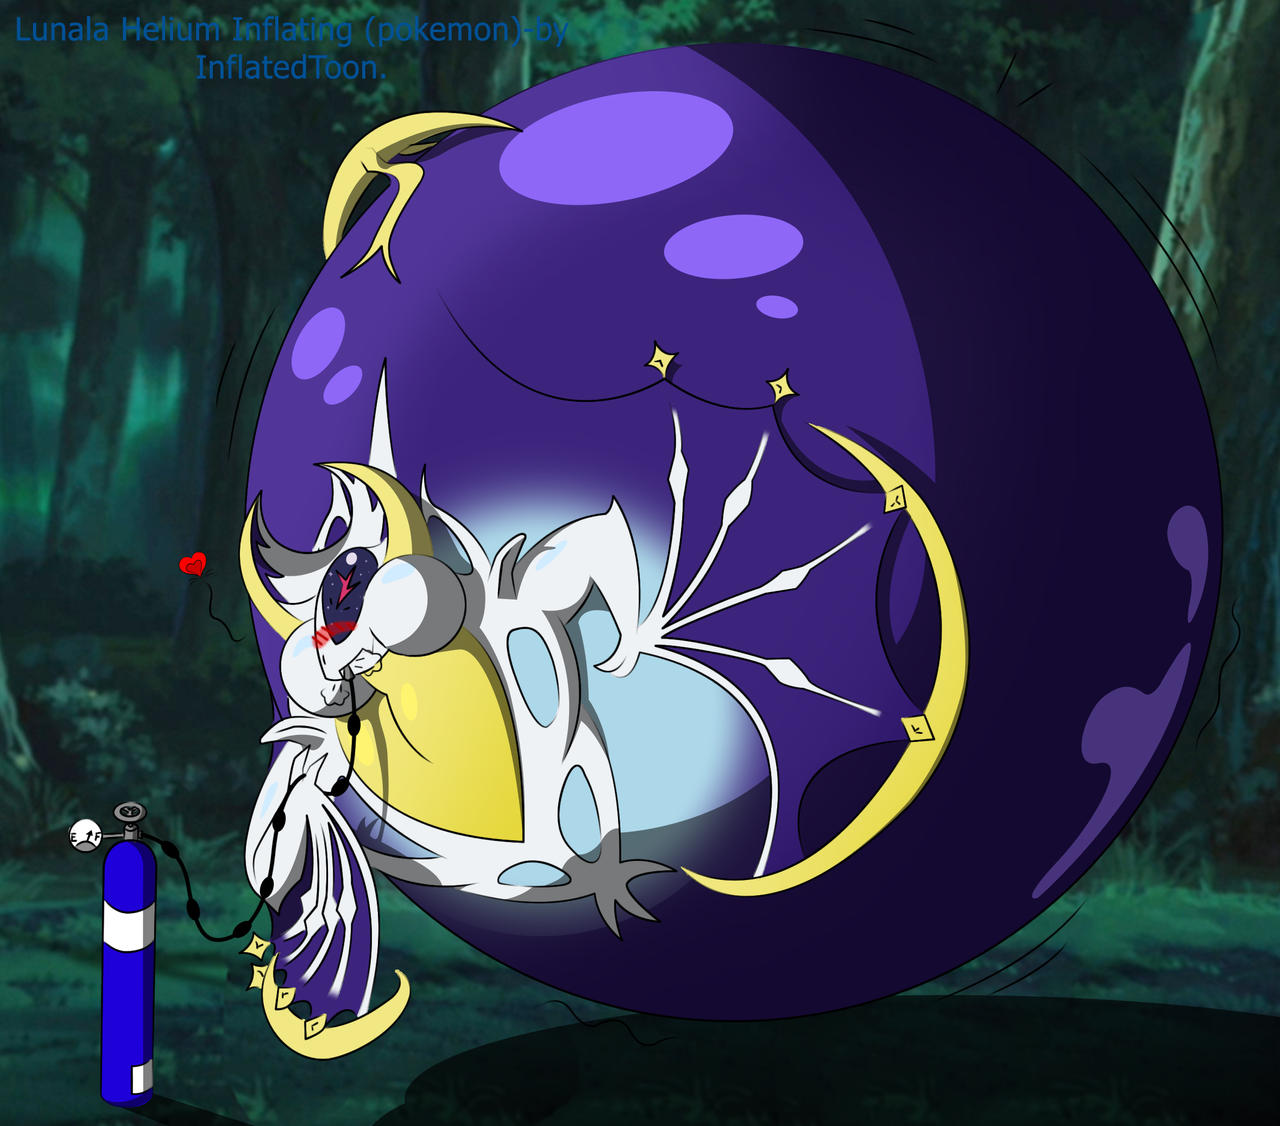 the size of lunala! are there other pokemon that get giant like